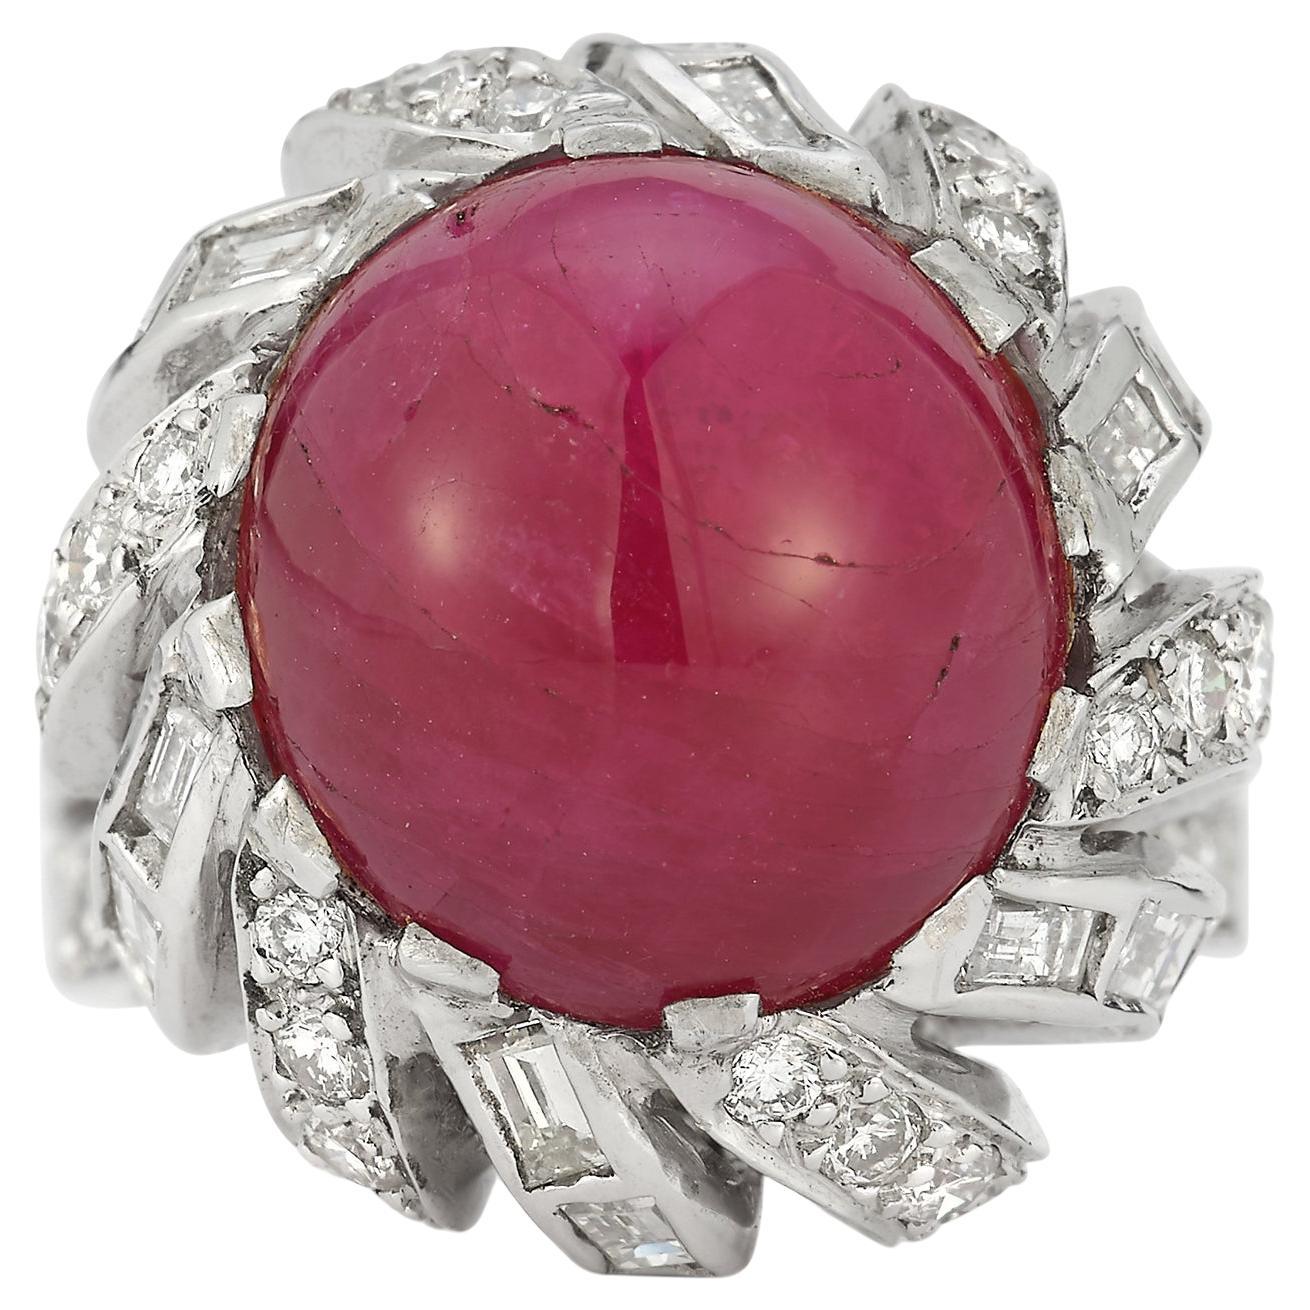 Cabochon Ruby Ring 

1 cabochon center ruby surrounded by round & baguette cut diamonds set in 14k white gold.

Ruby Weight: 15.19 cts 

Diamond Weight: 5.26 cts 

Ring Size: 5.75

Resizable free of charge 

